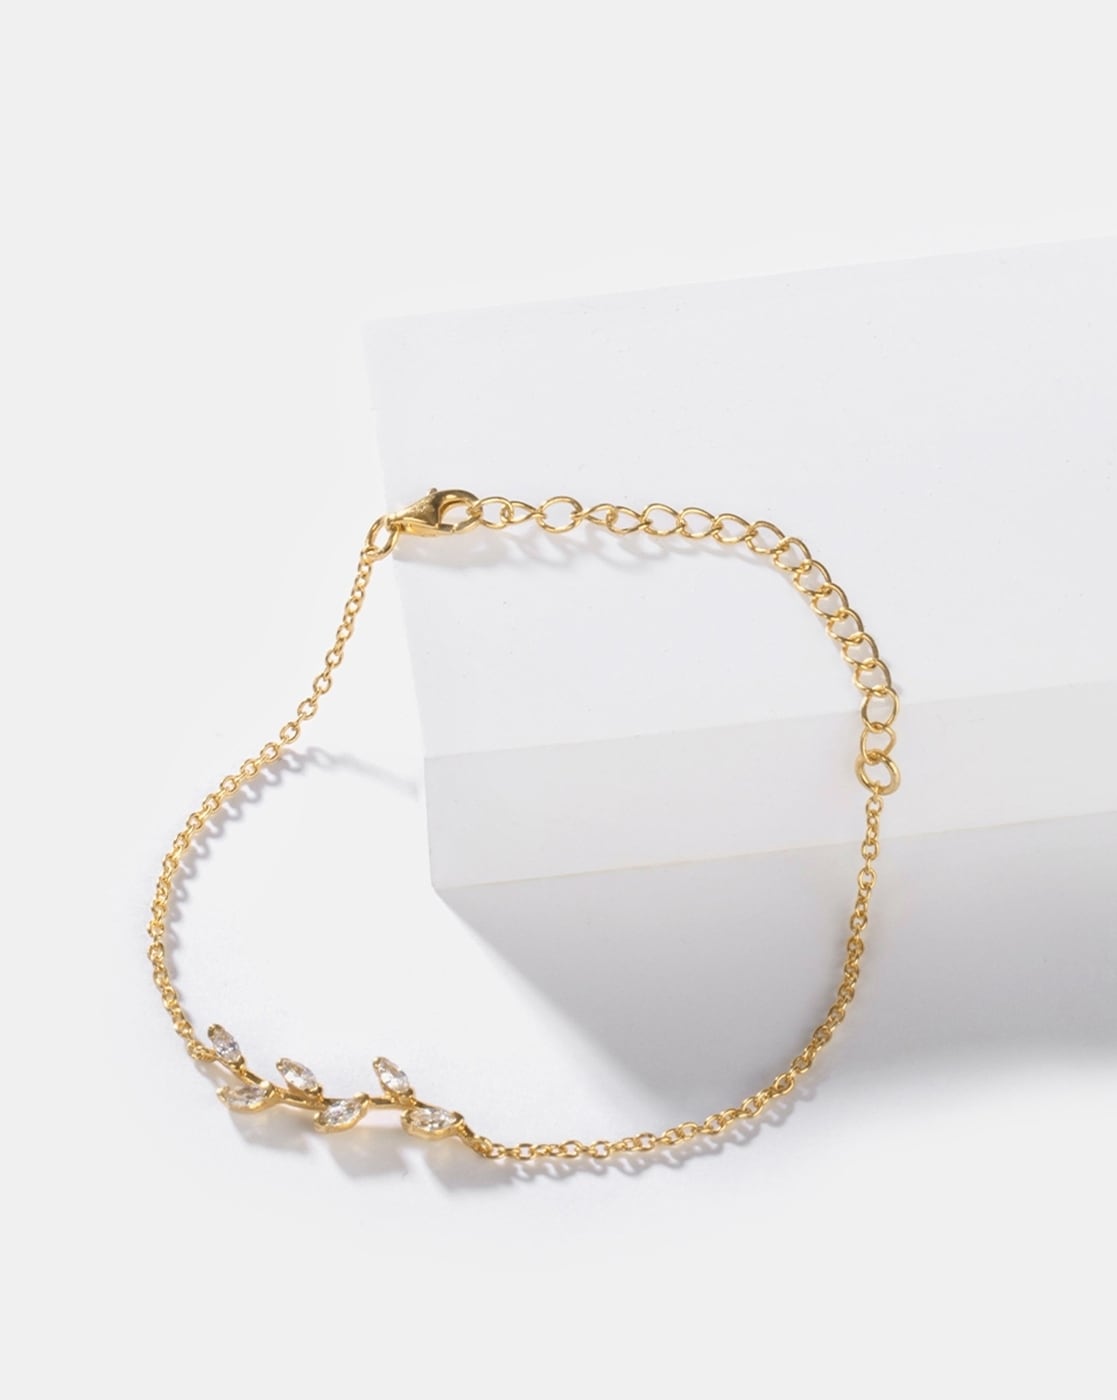 Joker  Witch Gold Chunky Chain Link Set Of 3 Bracelets For Women Buy  Joker  Witch Gold Chunky Chain Link Set Of 3 Bracelets For Women Online at  Best Price in